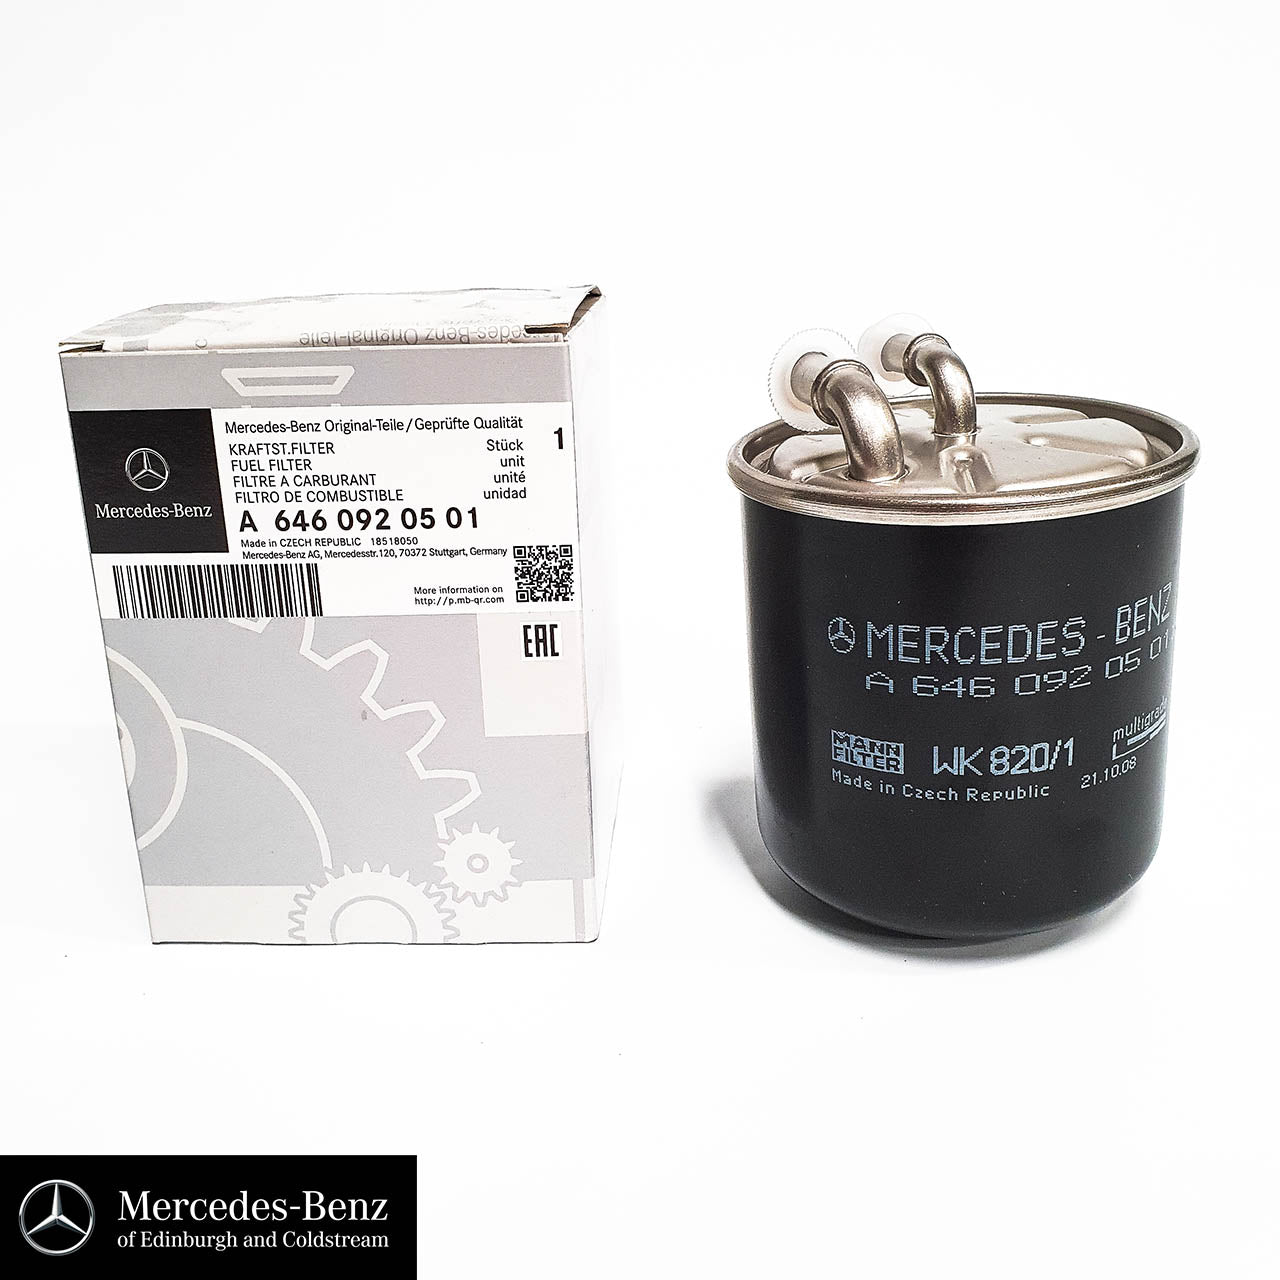 Genuine Mercedes-Benz Fuel Filter with out heating element for diesel engines